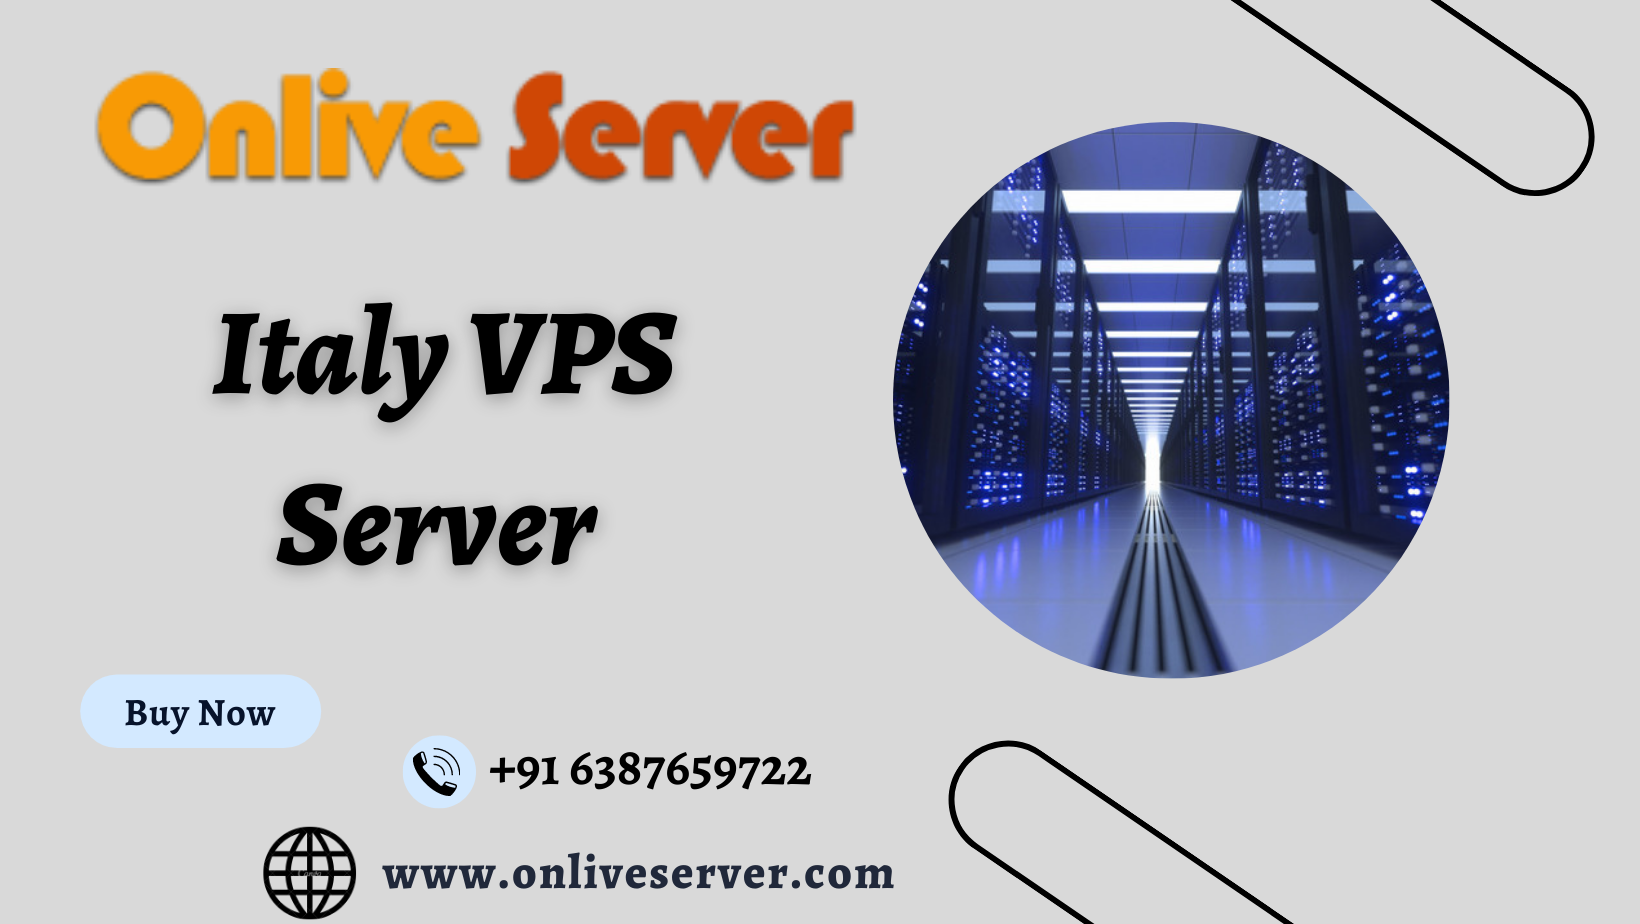 Get the Italy VPS Server from Onlive Server with Cheap Linux VPS Hosting